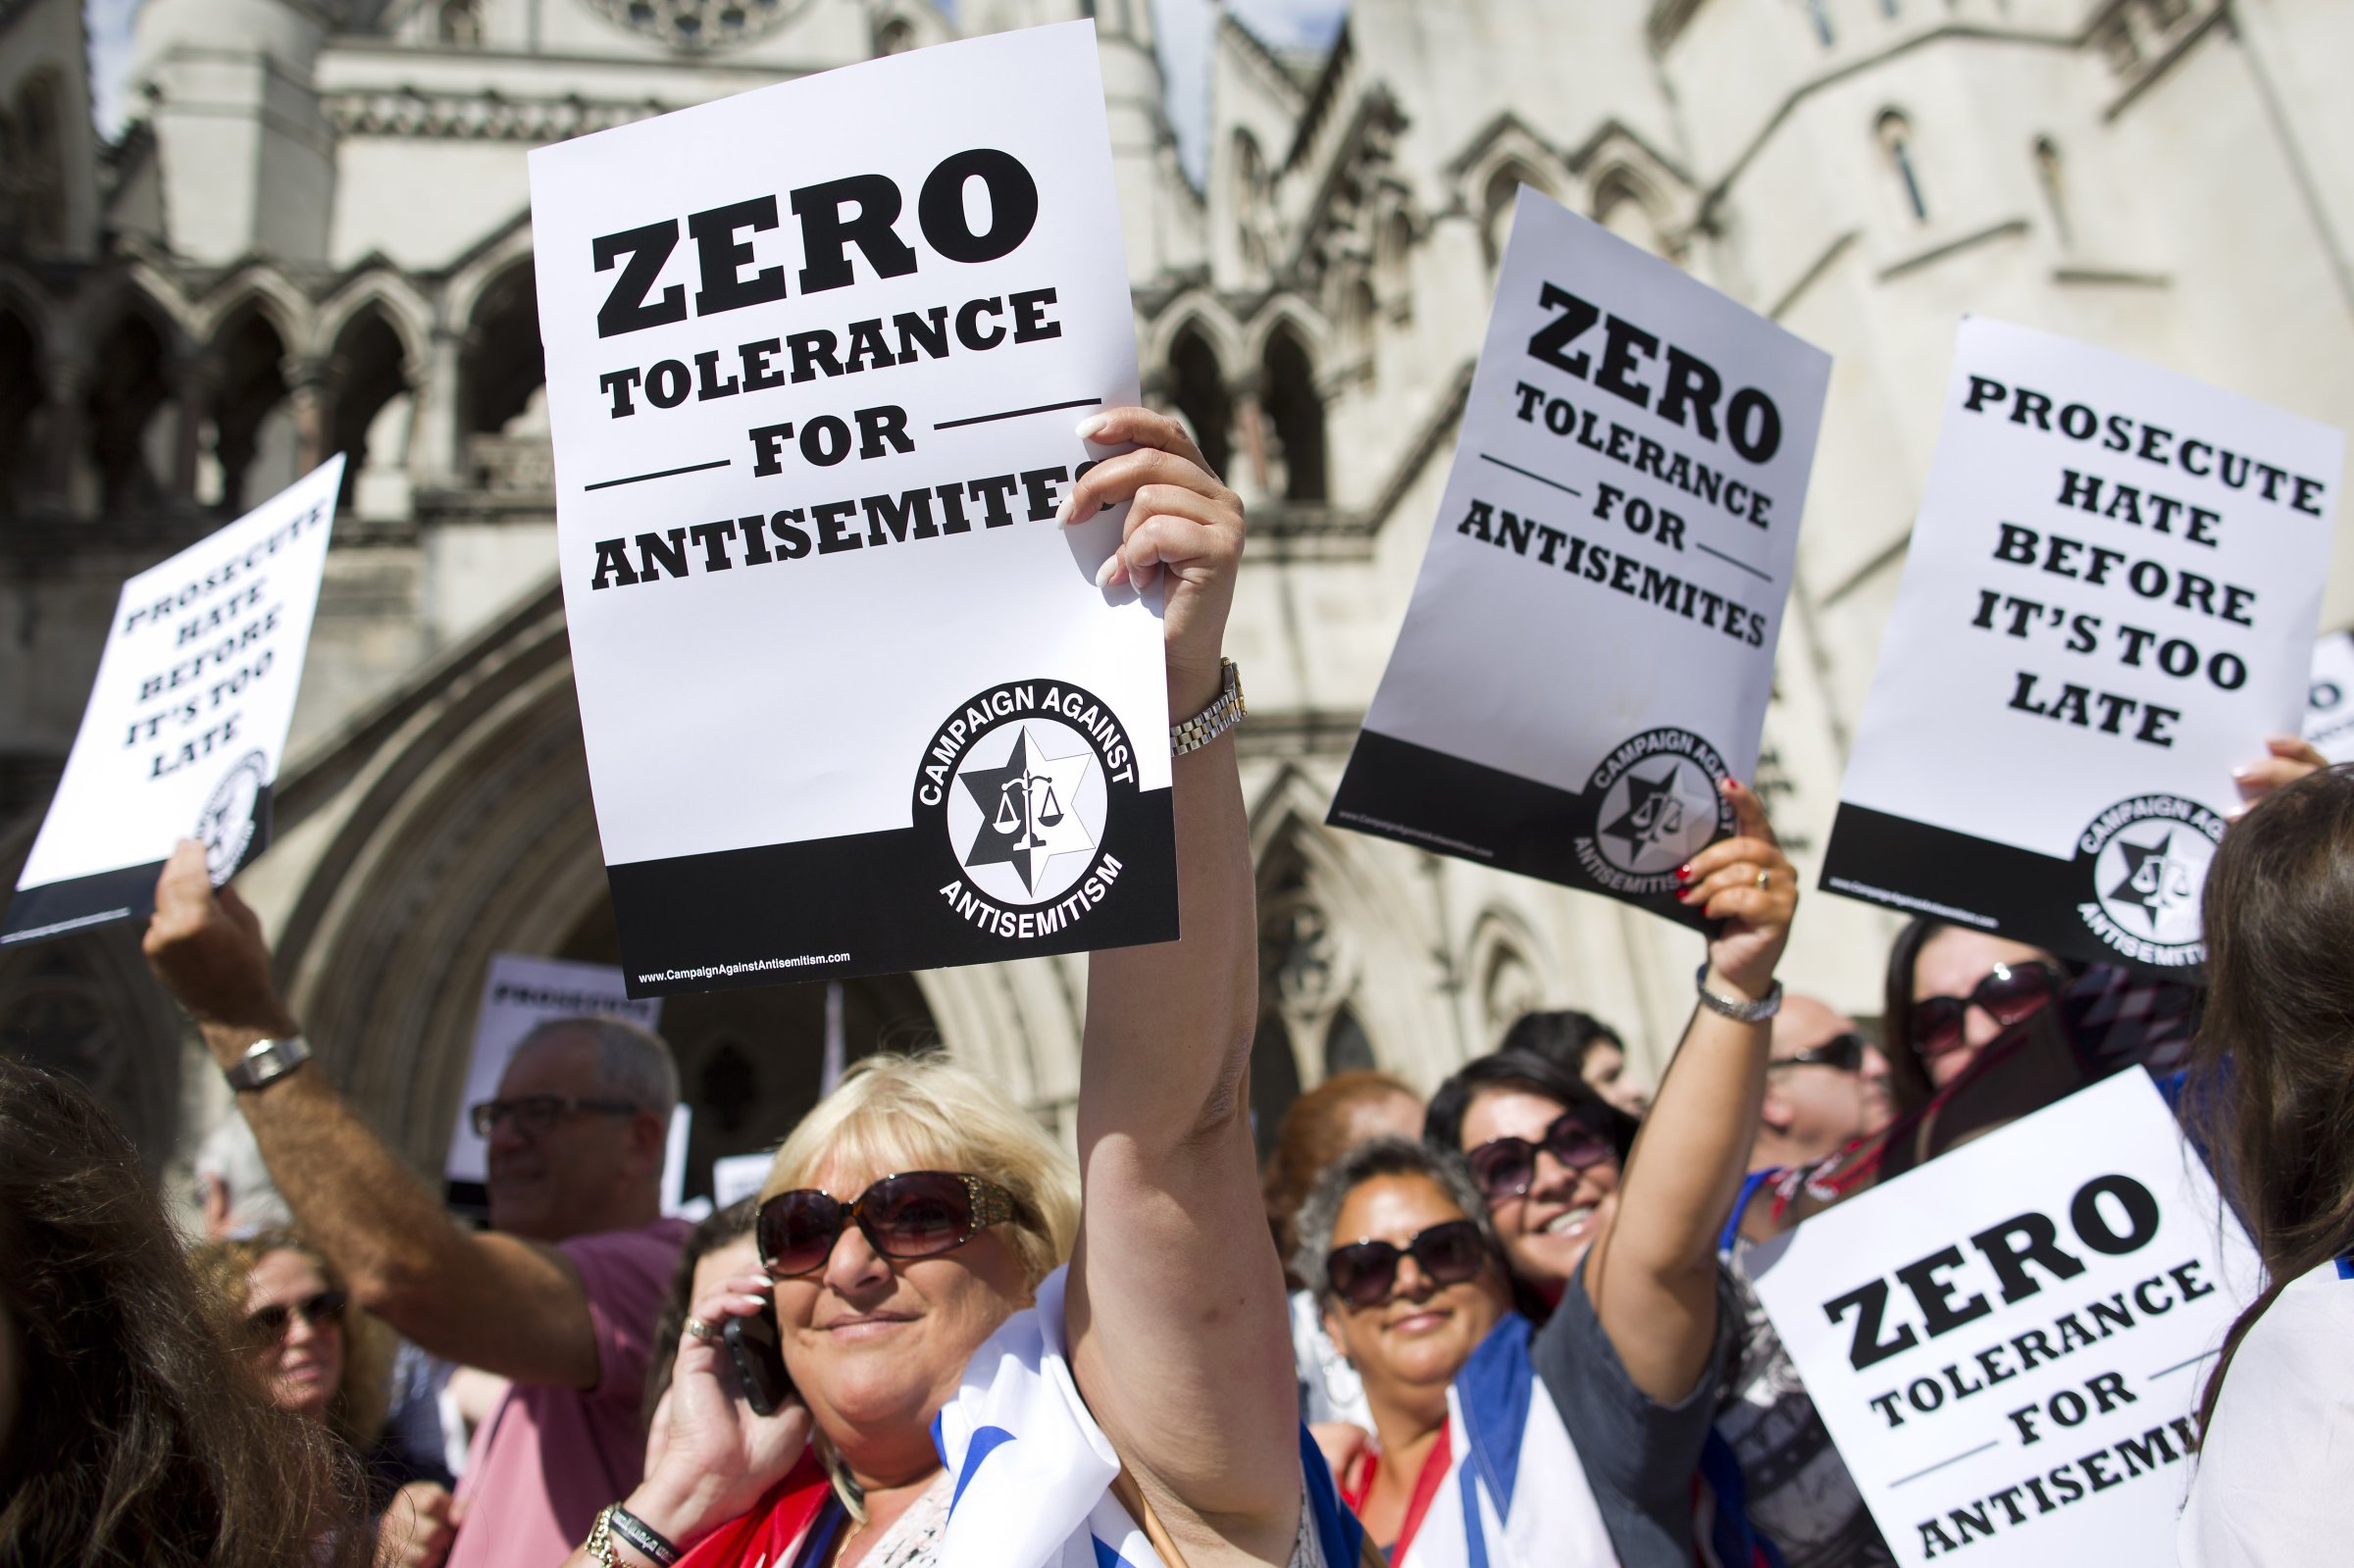 Jewish groups protest outside the Royal Courts of Justice in London on August 31, 2014, as they call for "Zero Tolerance for Anti-Semitism". Jewish groups demonstrated outside the British High Court as latest figures published by the Community Security Trust reported a spike in anti-semitic attacks on people and property in the UK following the lastest outbreak of violence between Israel and Palestinians in Gaza.